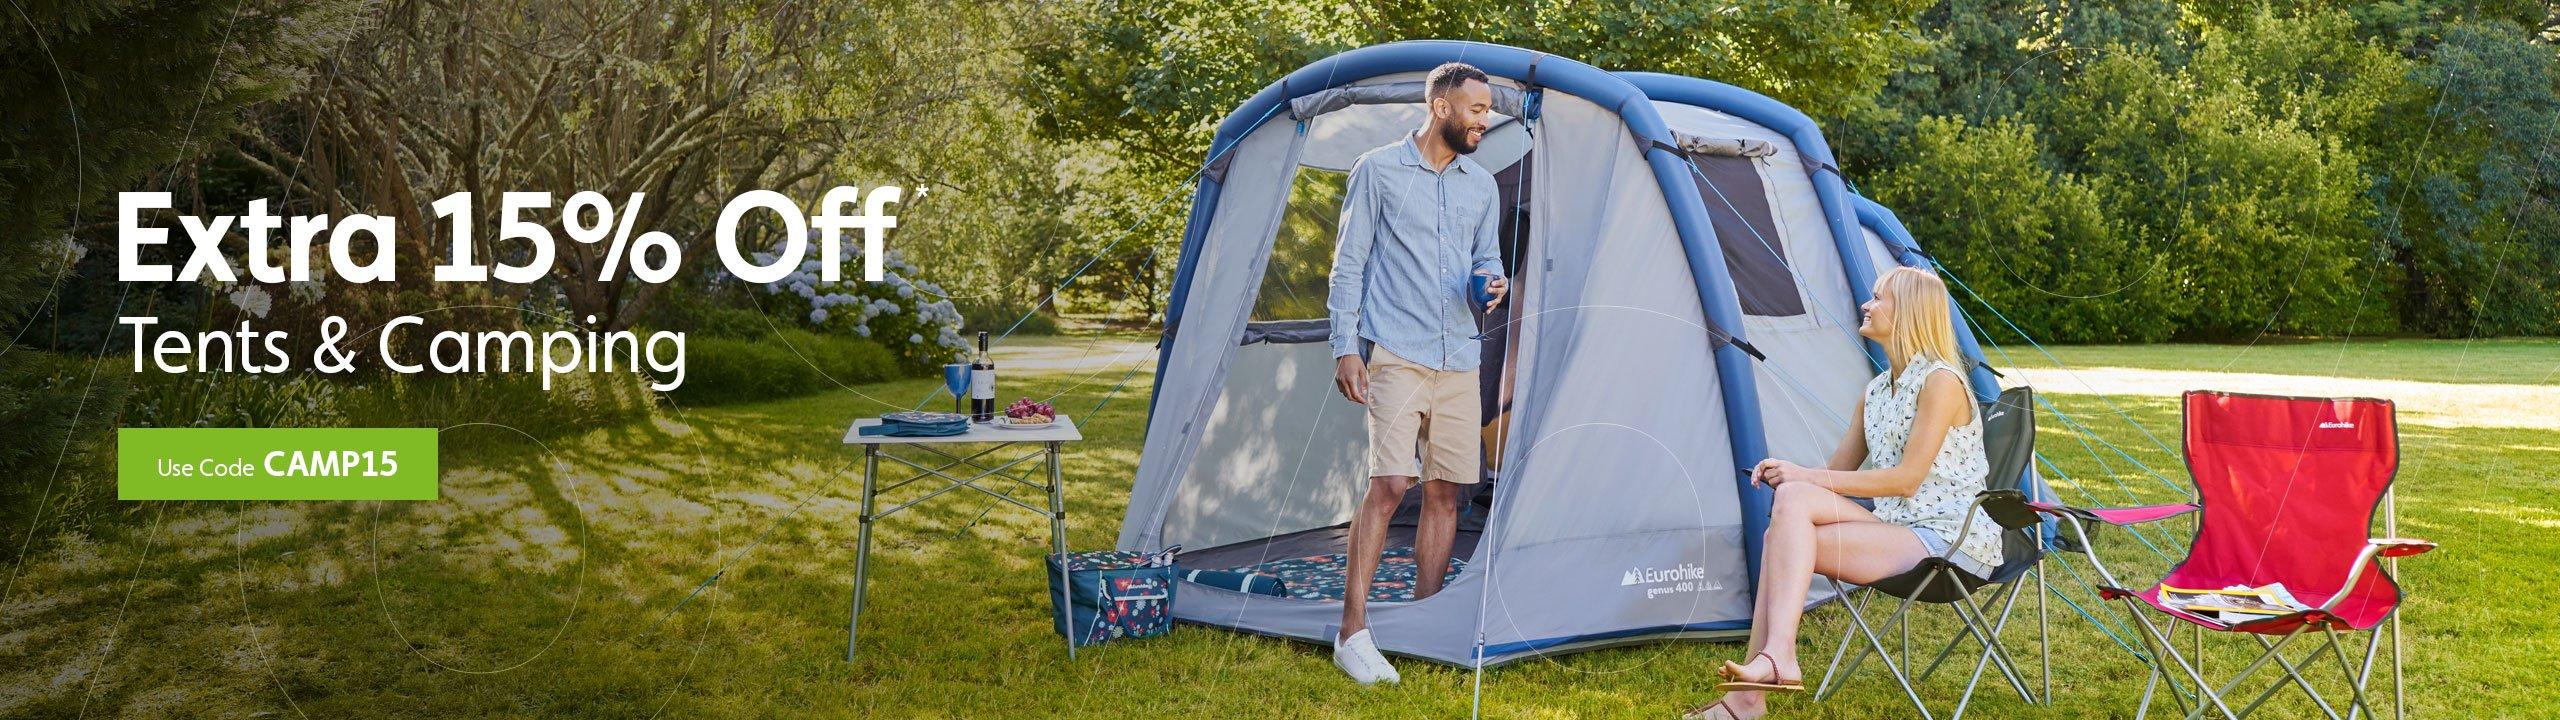 Extra 15% OFF* Tents & Camping With Code CAMP15